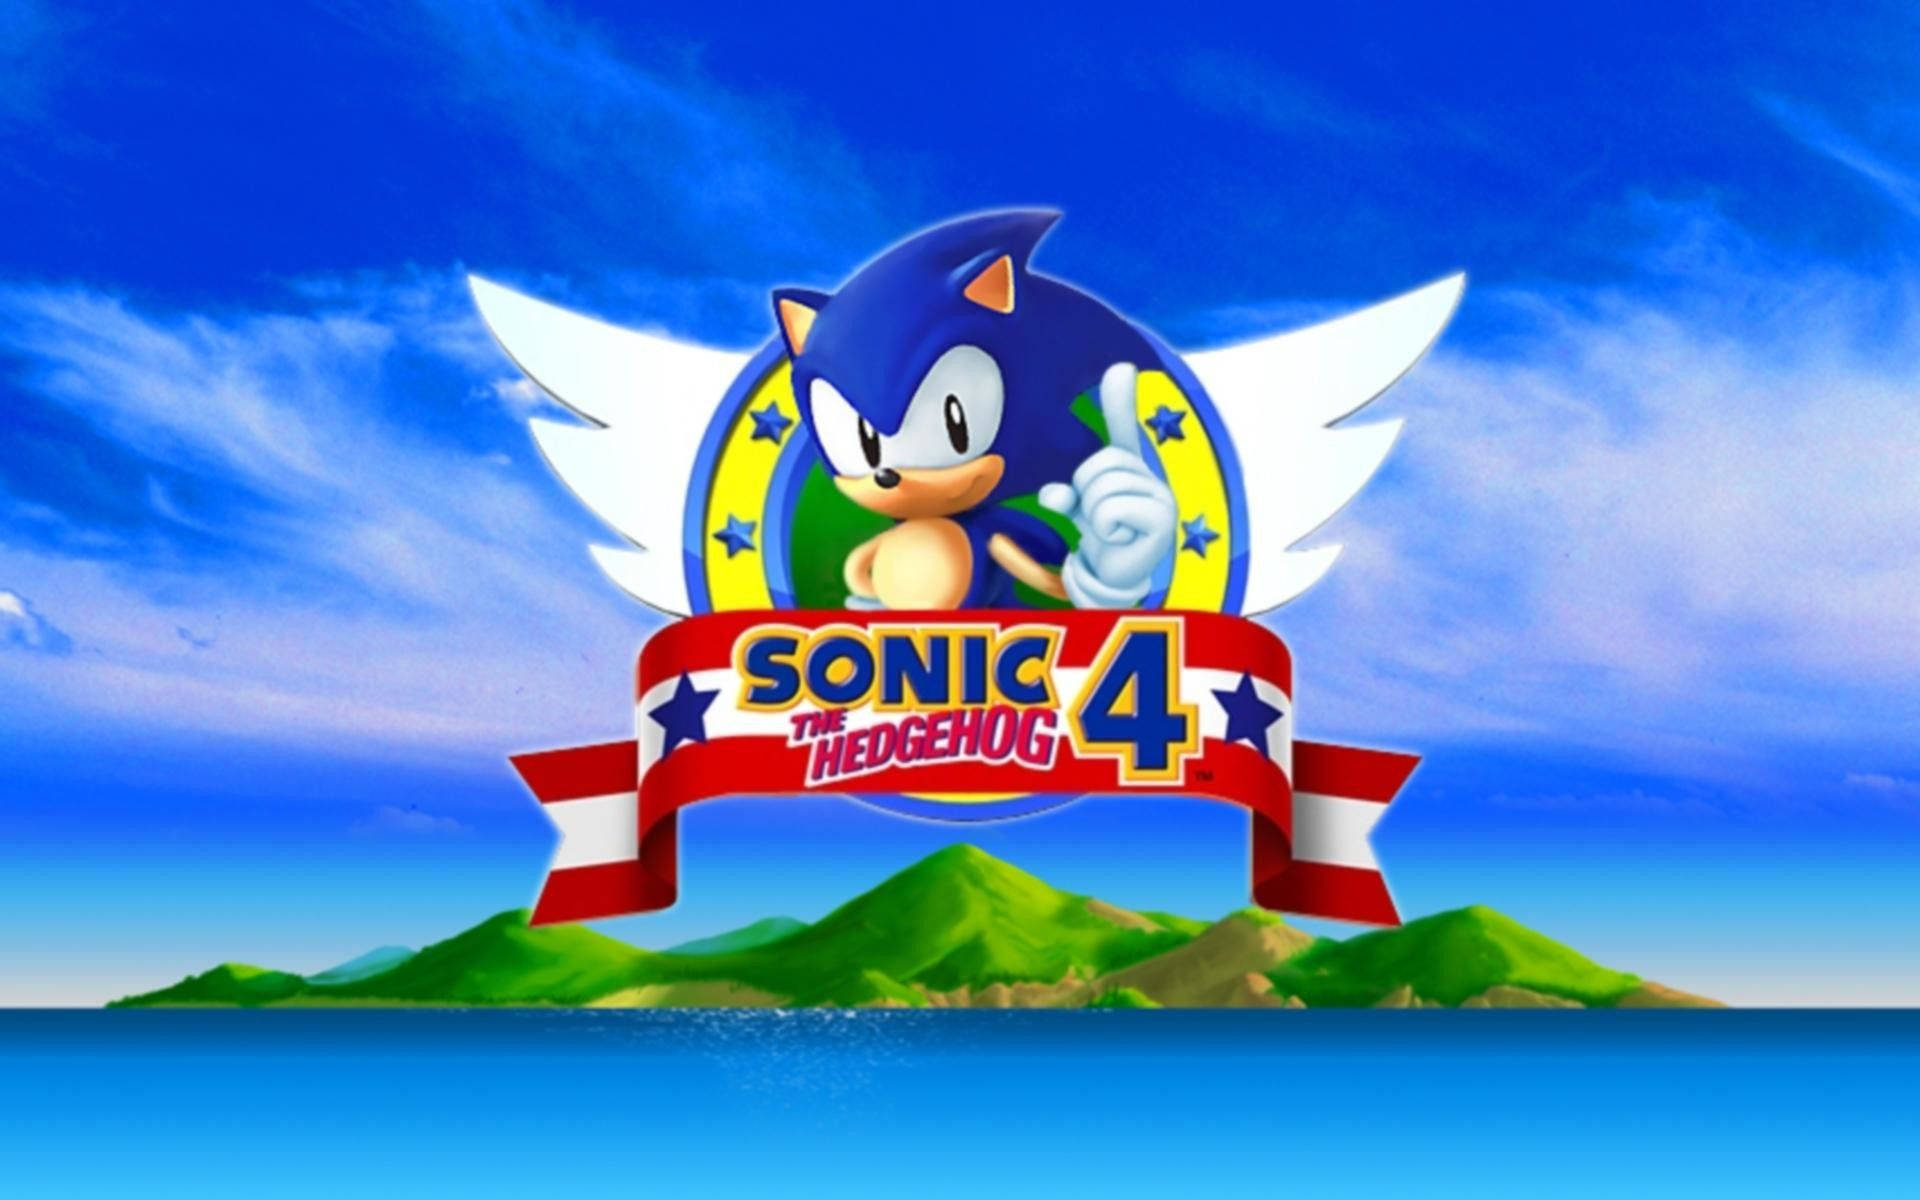 Sonic The Hedgehog 4 Game Hd Cover Background